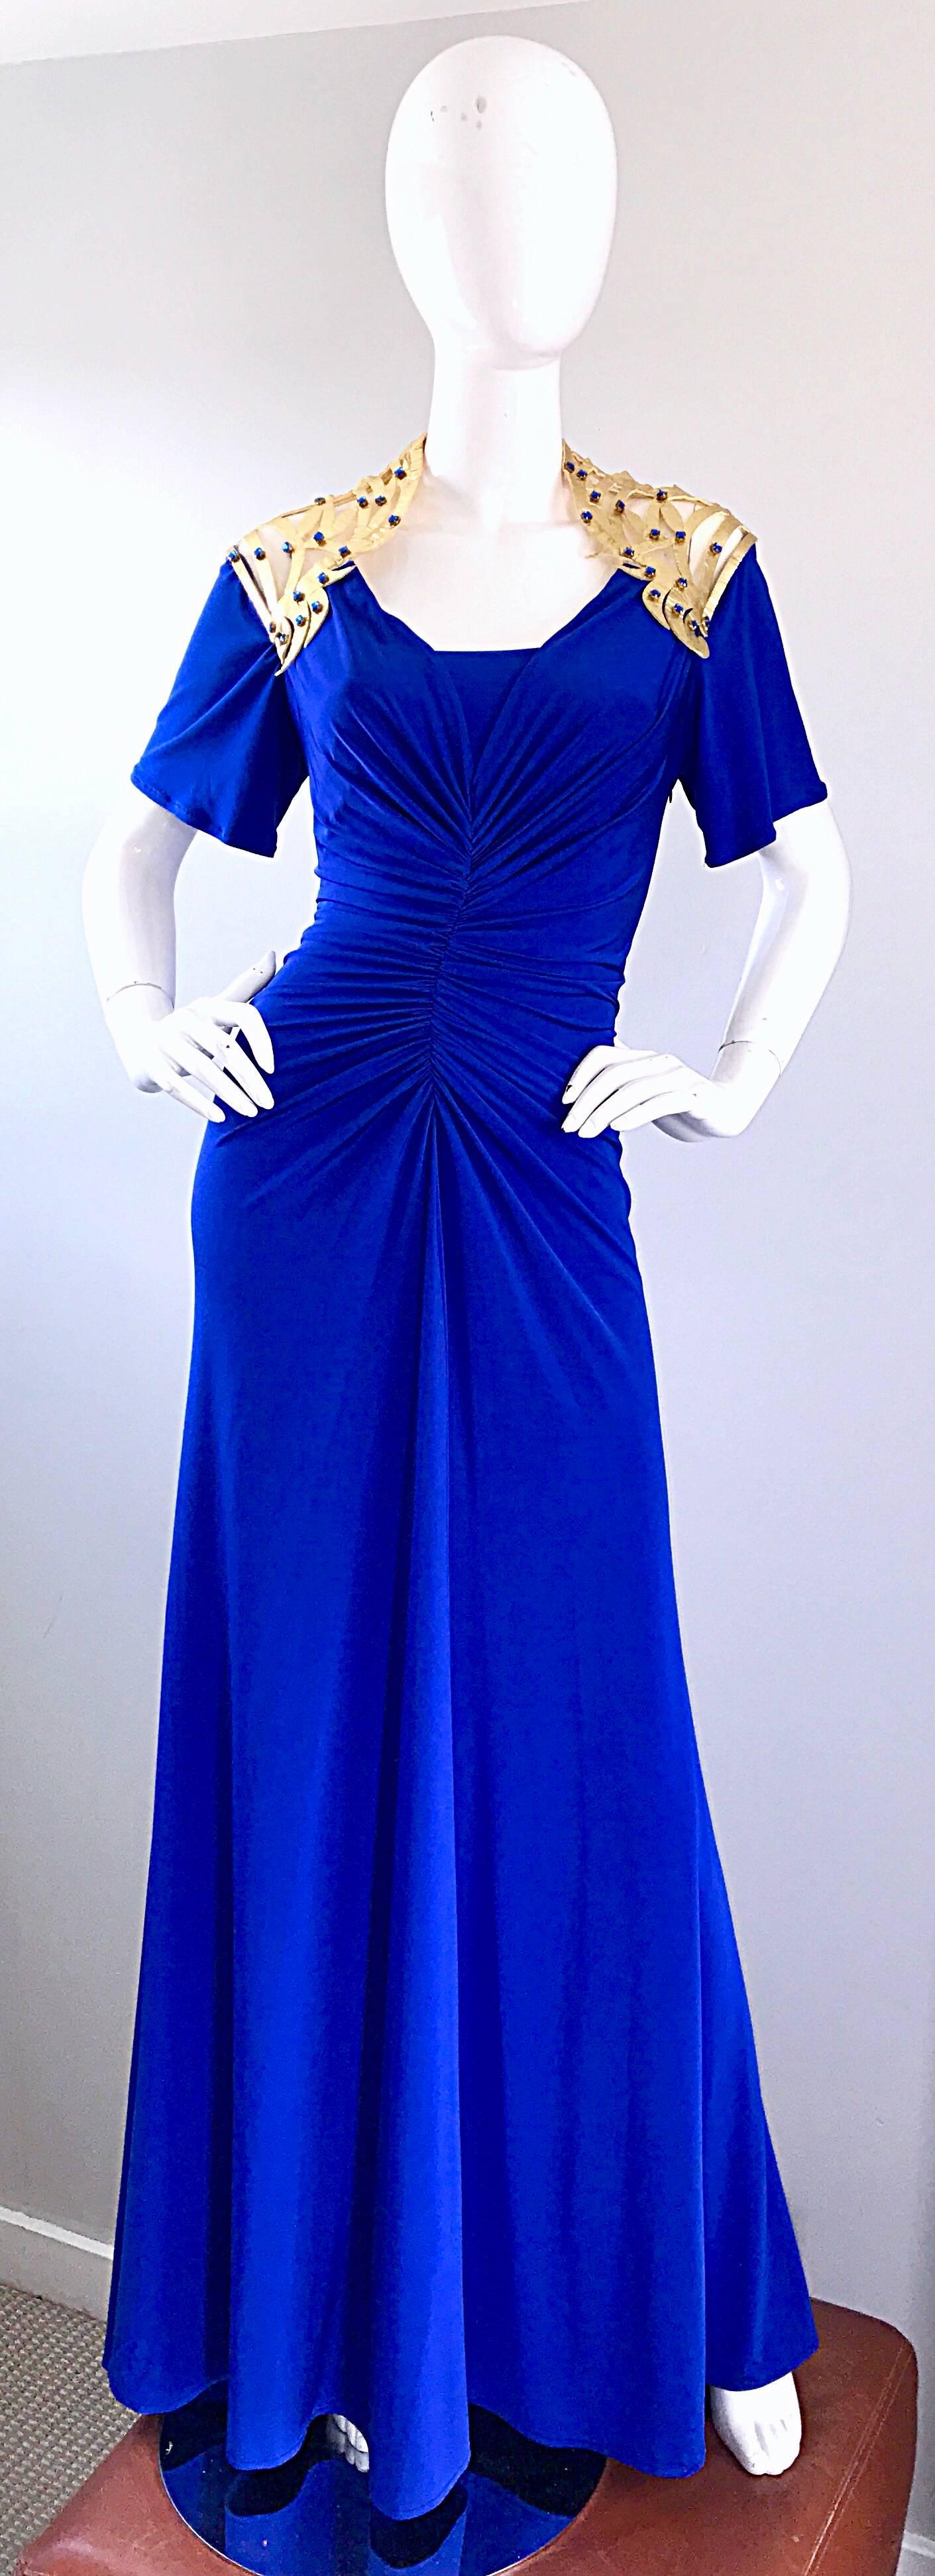 Incredible Vintage Royal Blue Jersey + Gold Leather Beaded Grecian Evening Gown 1